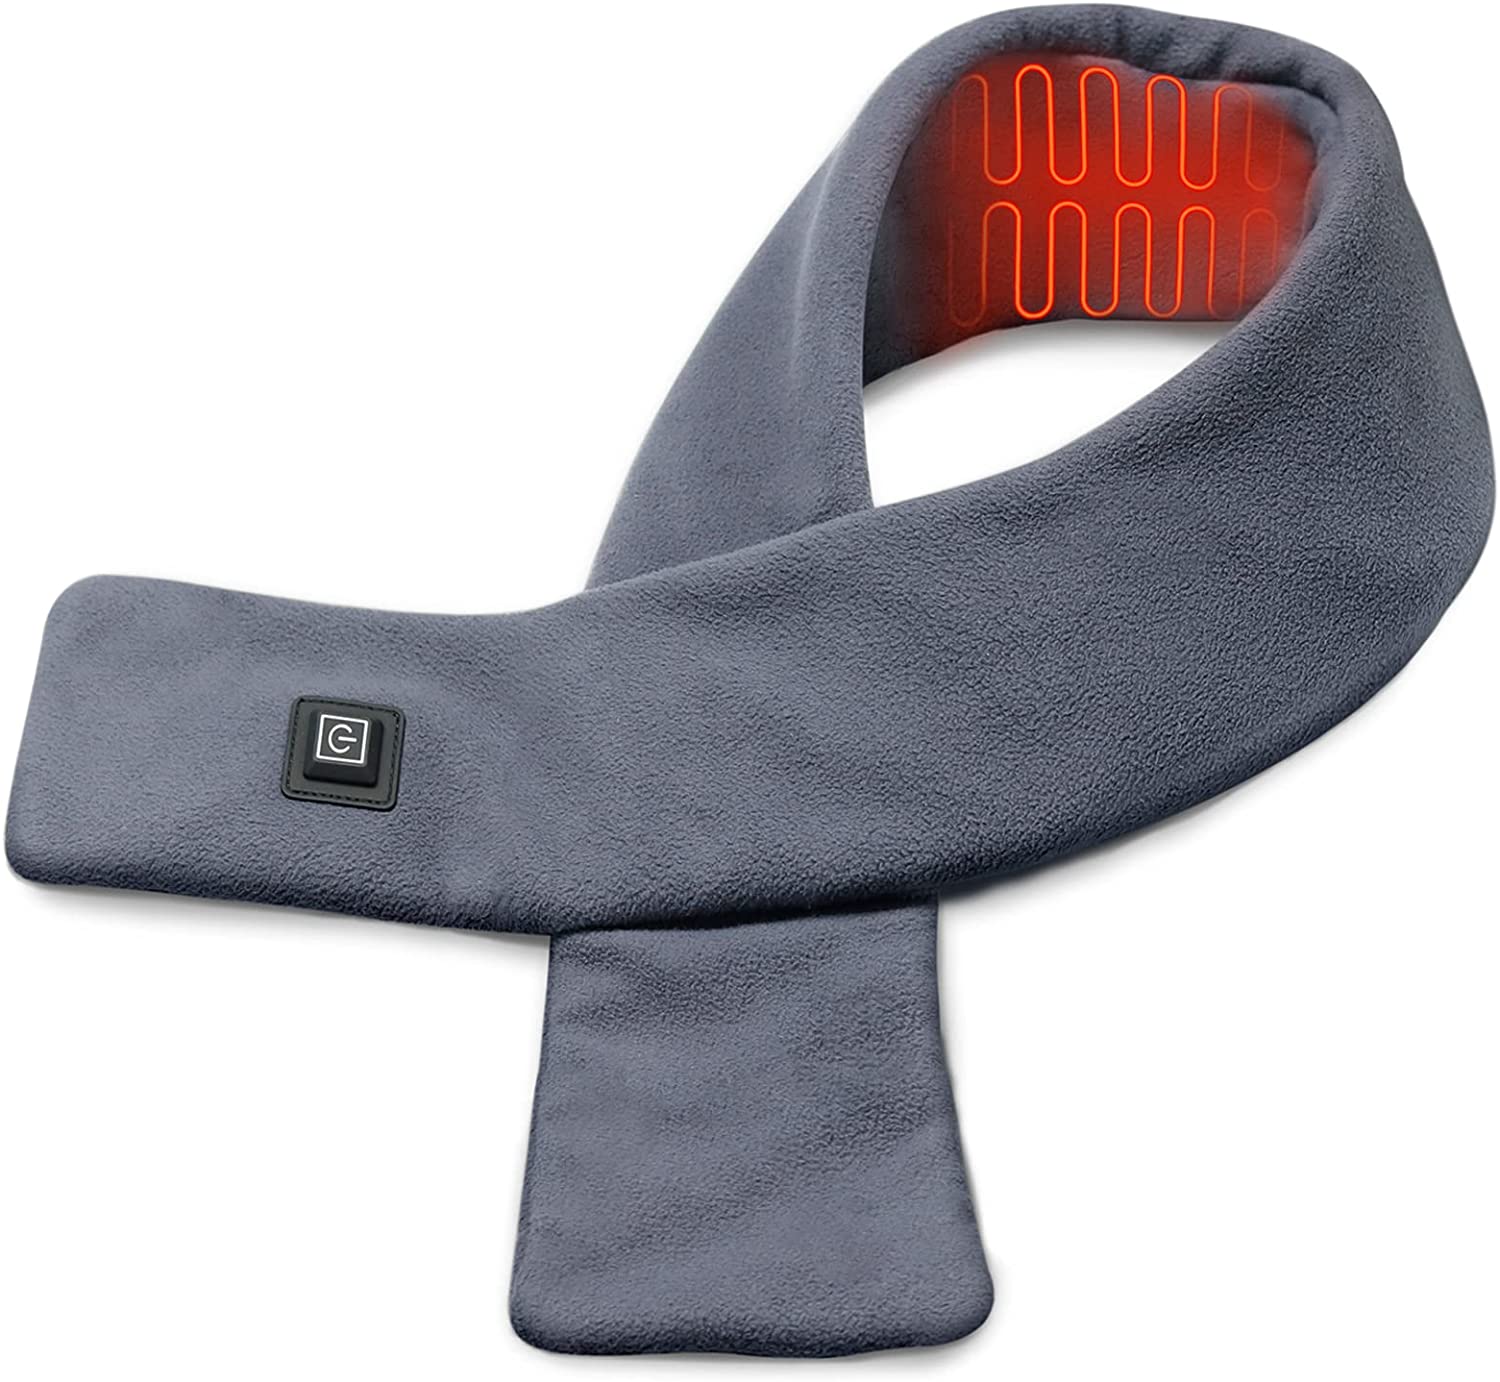 A Simple Way to Have the Best Best far Infrared Heating Pad Options 2